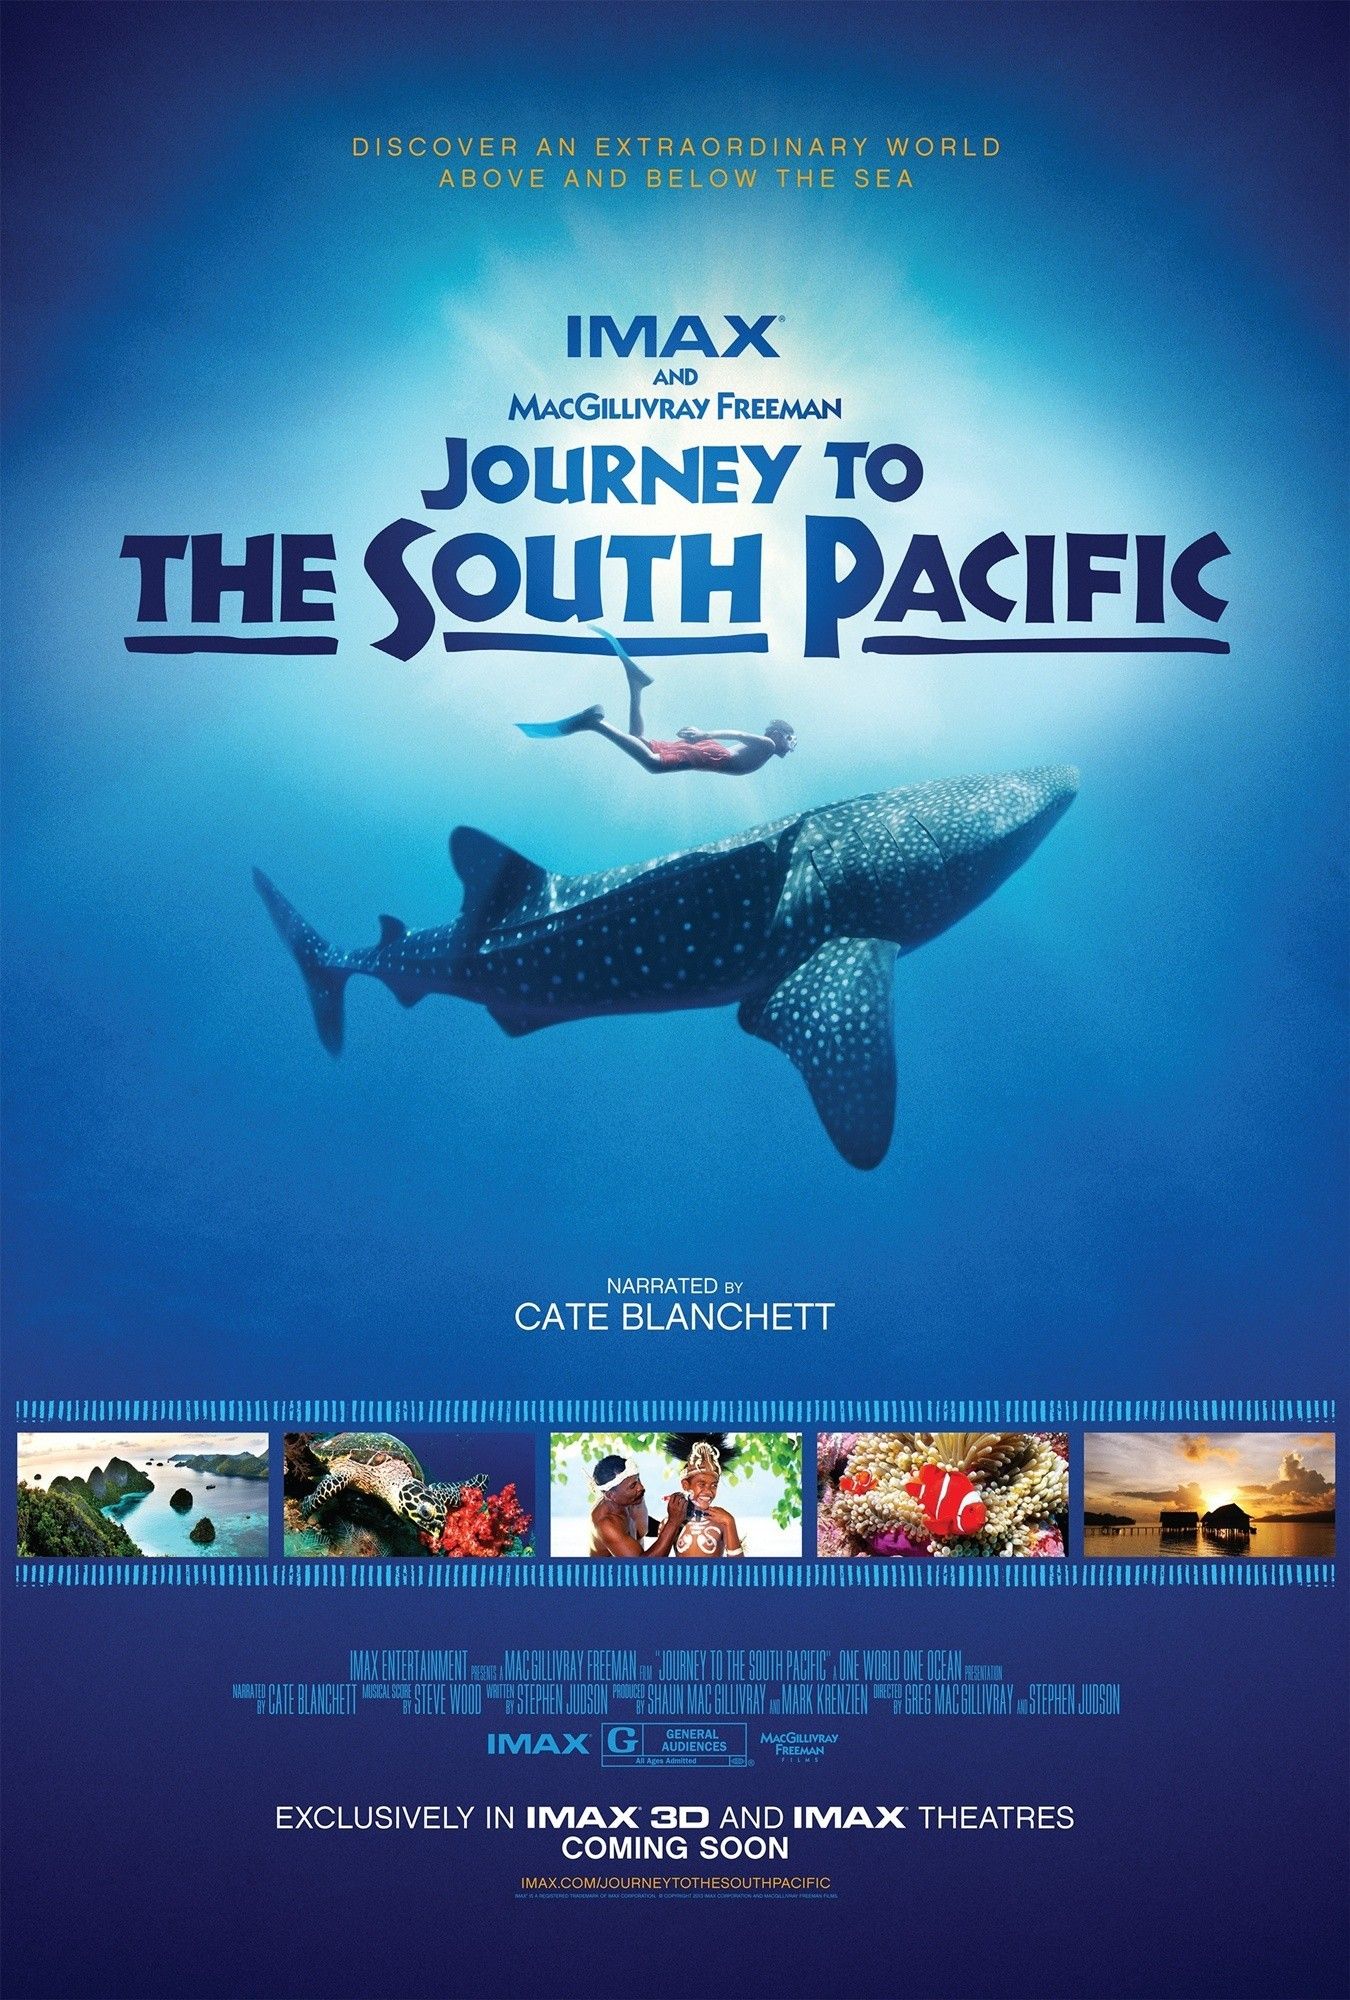 Poster of IMAX Entertainment's Journey to the South Pacific (2013)